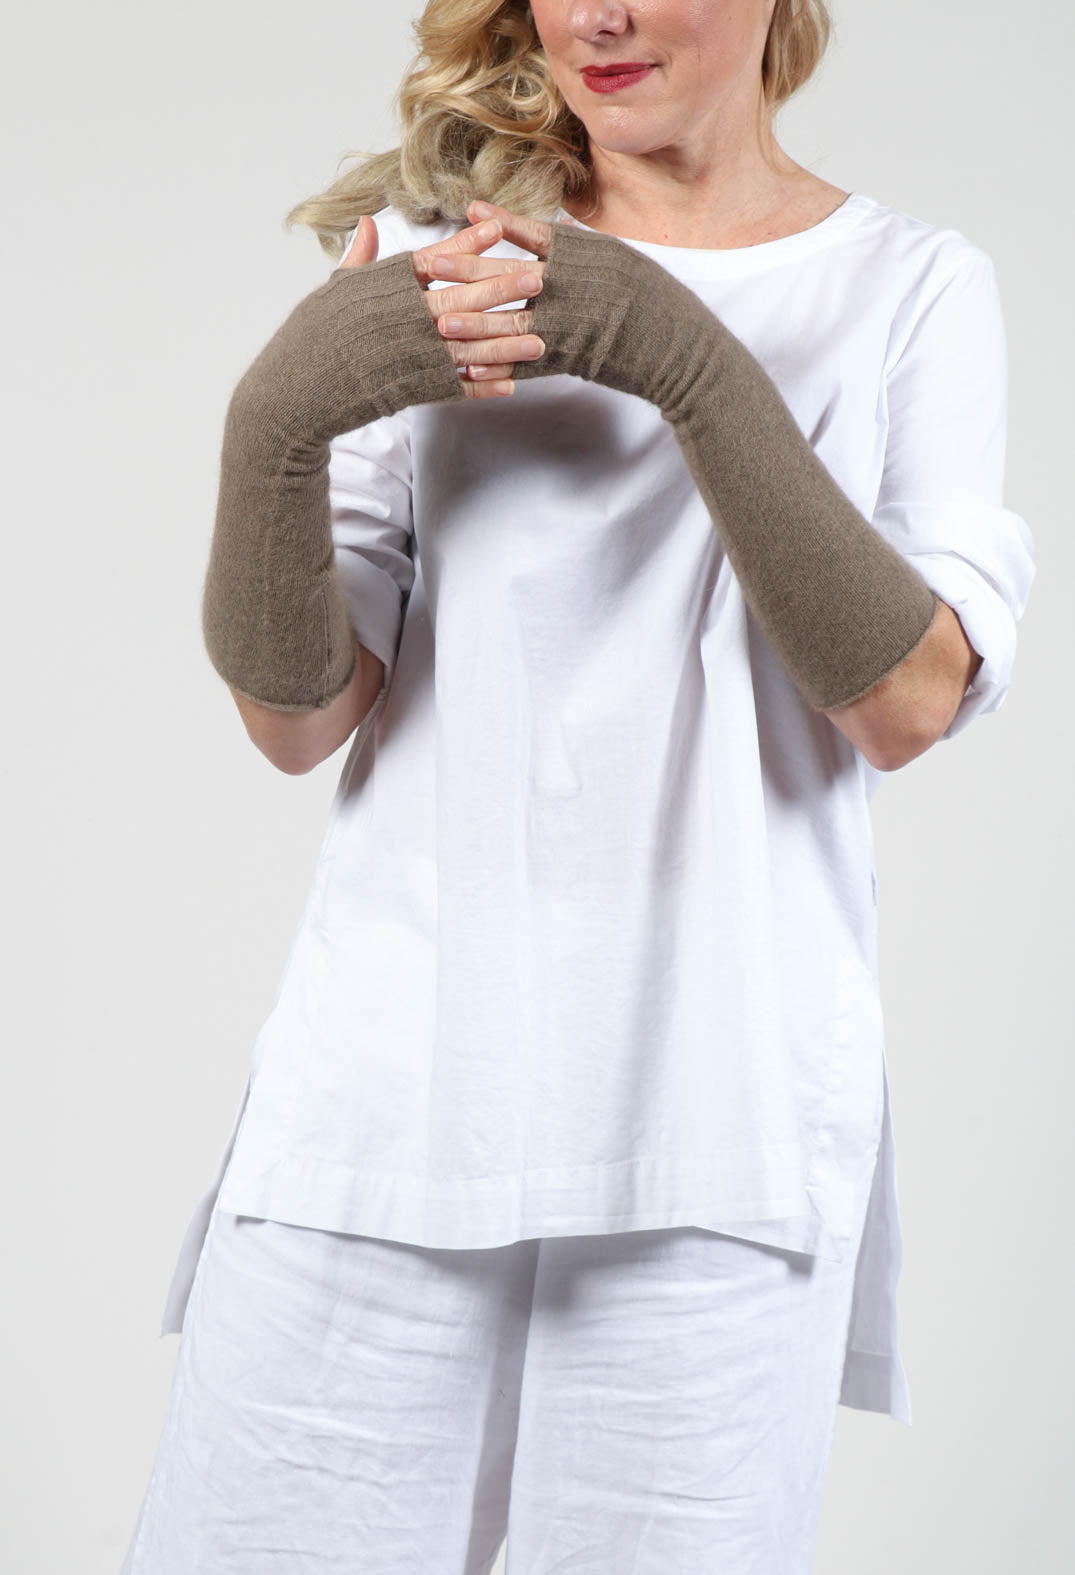 Fingerless Gloves in Cappuccino